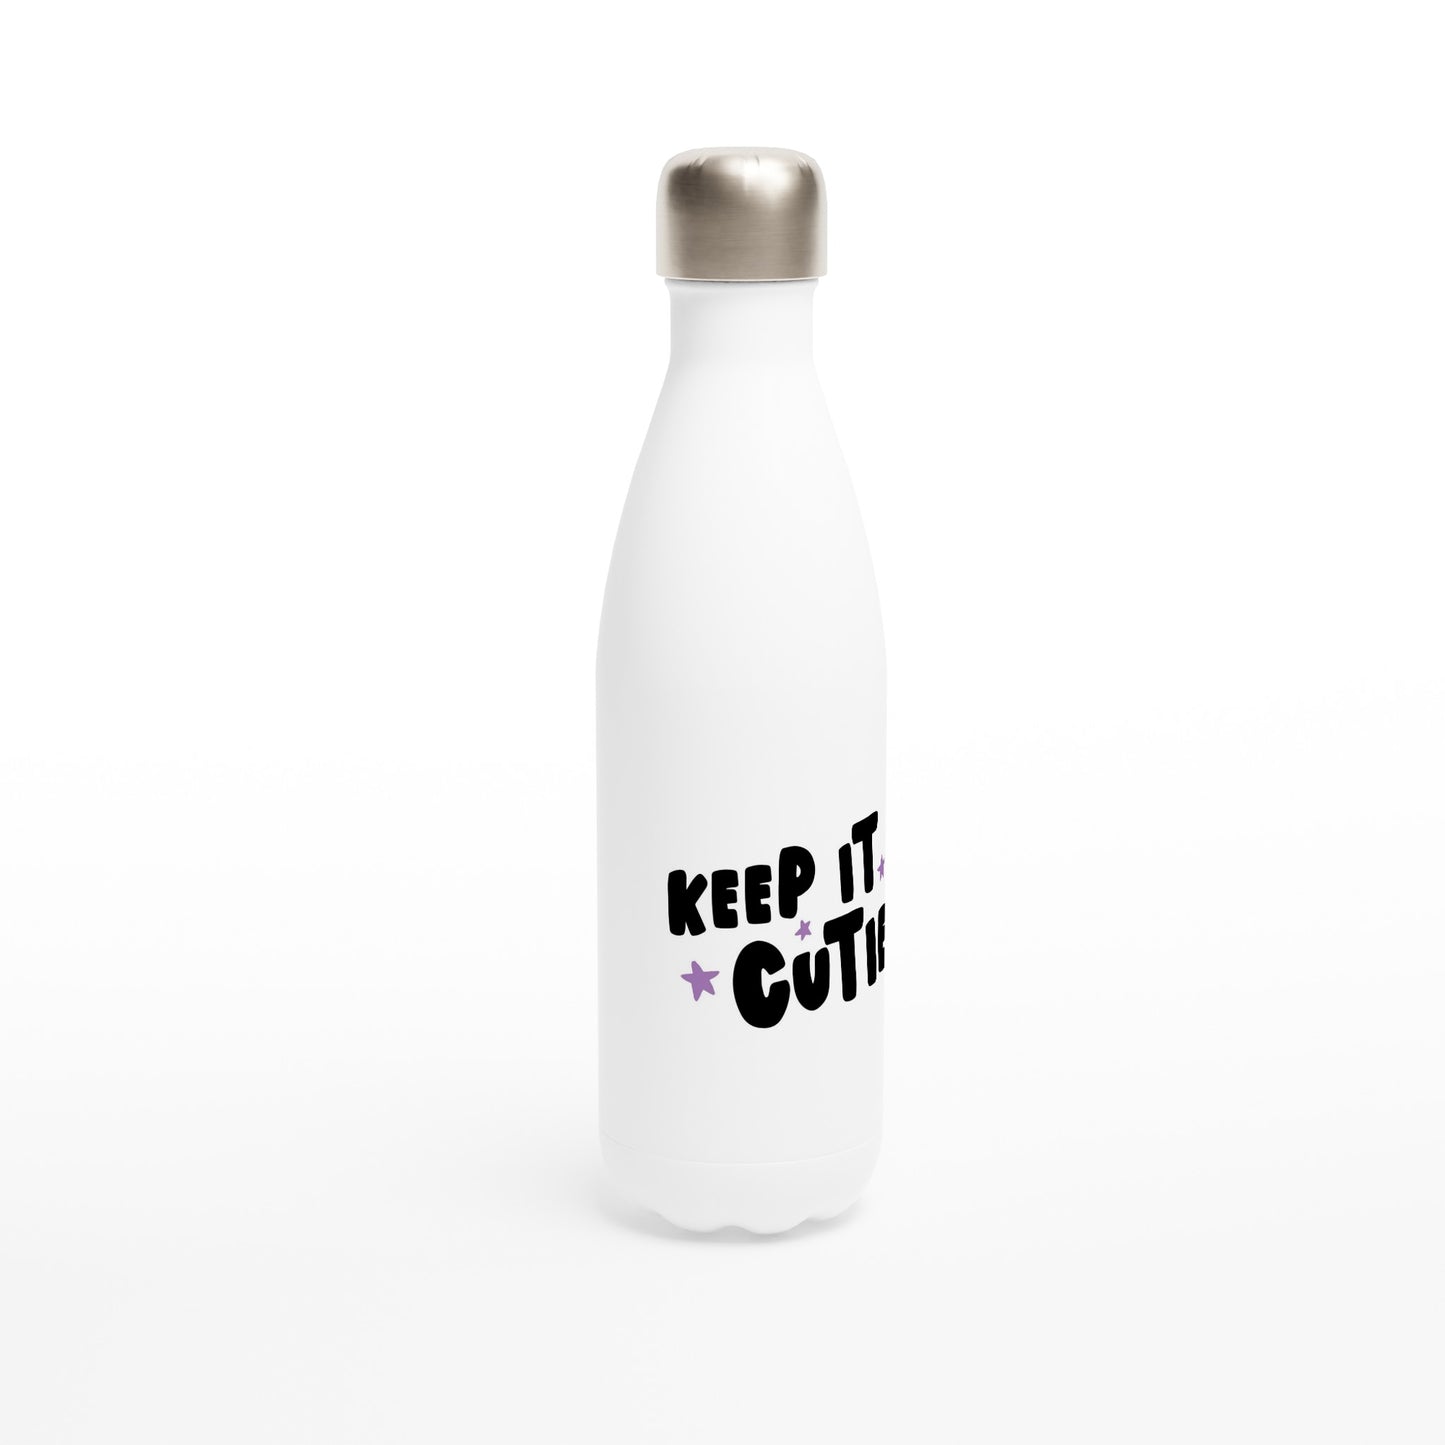 White 17oz Stainless Steel Water Bottle - KEEP IT UP, CUTIE